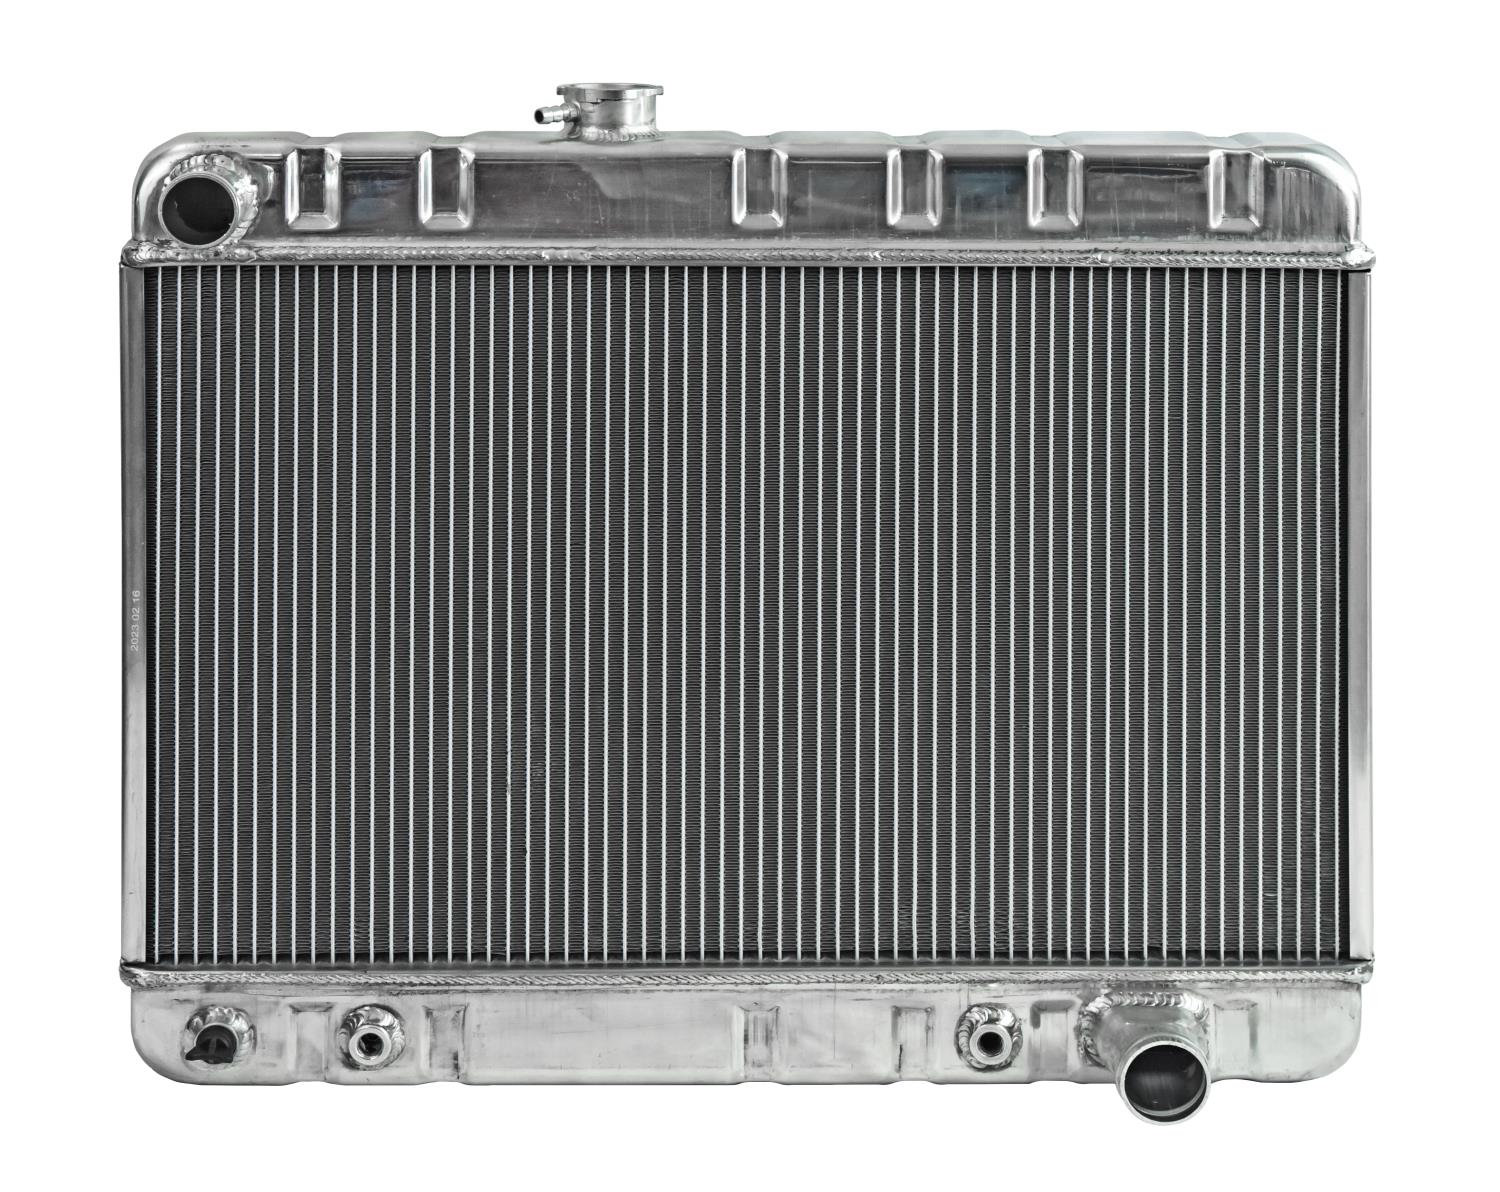 Reproduction Aluminum Radiator for 1966-1967 Pontiac GTO, Tempest, & LeMans [With Factory Air Conditioning]